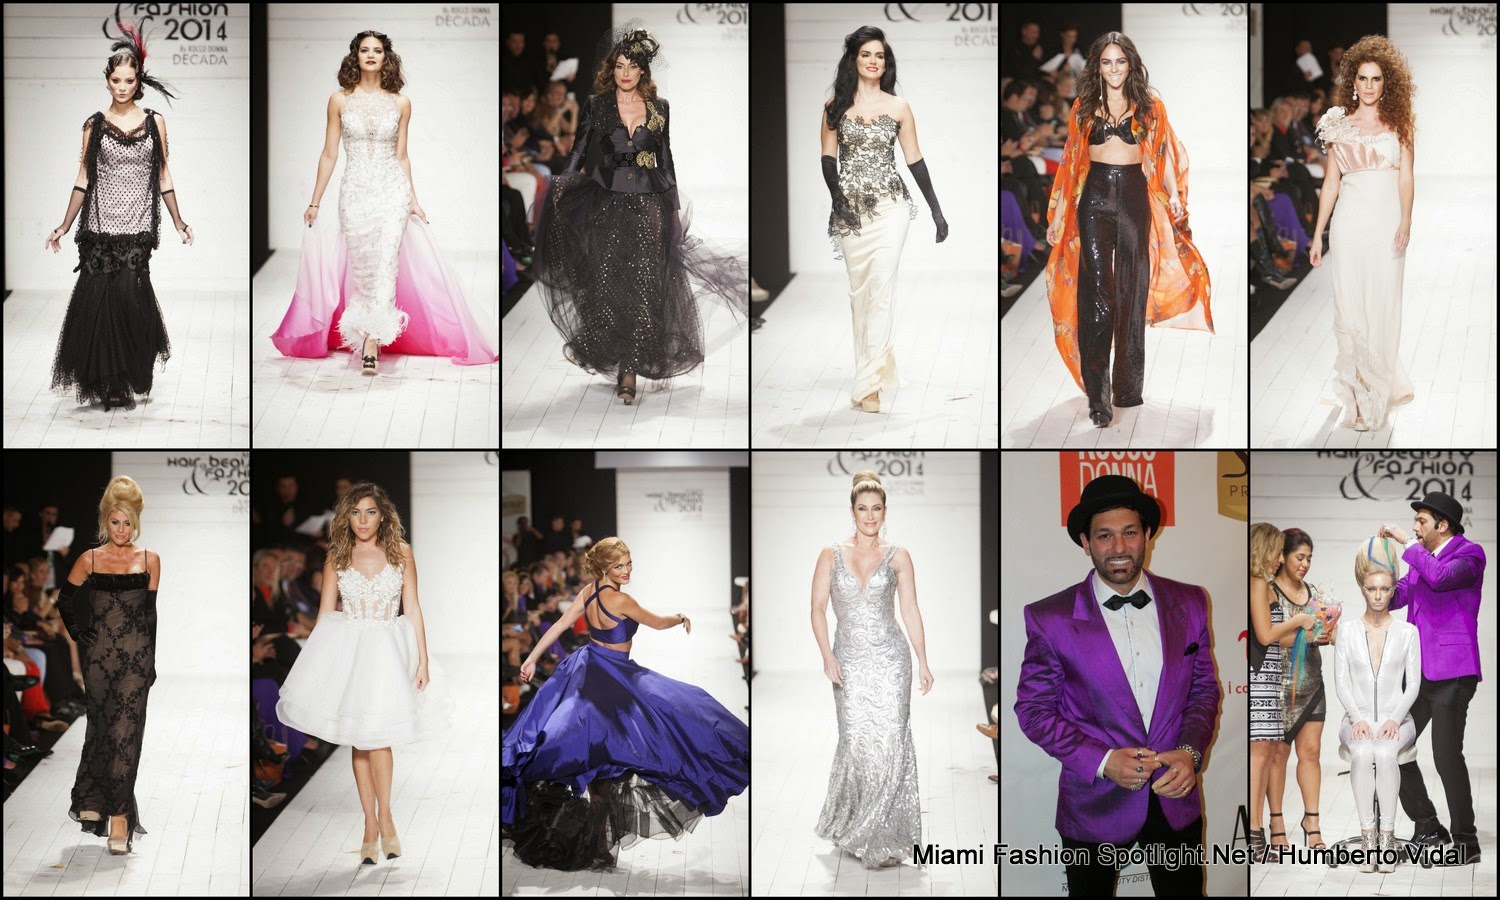 Leonardo Rocco celebrated a decade of the glamorous Miami Hair, Beauty & Fashion event with a look at fashion through the ages